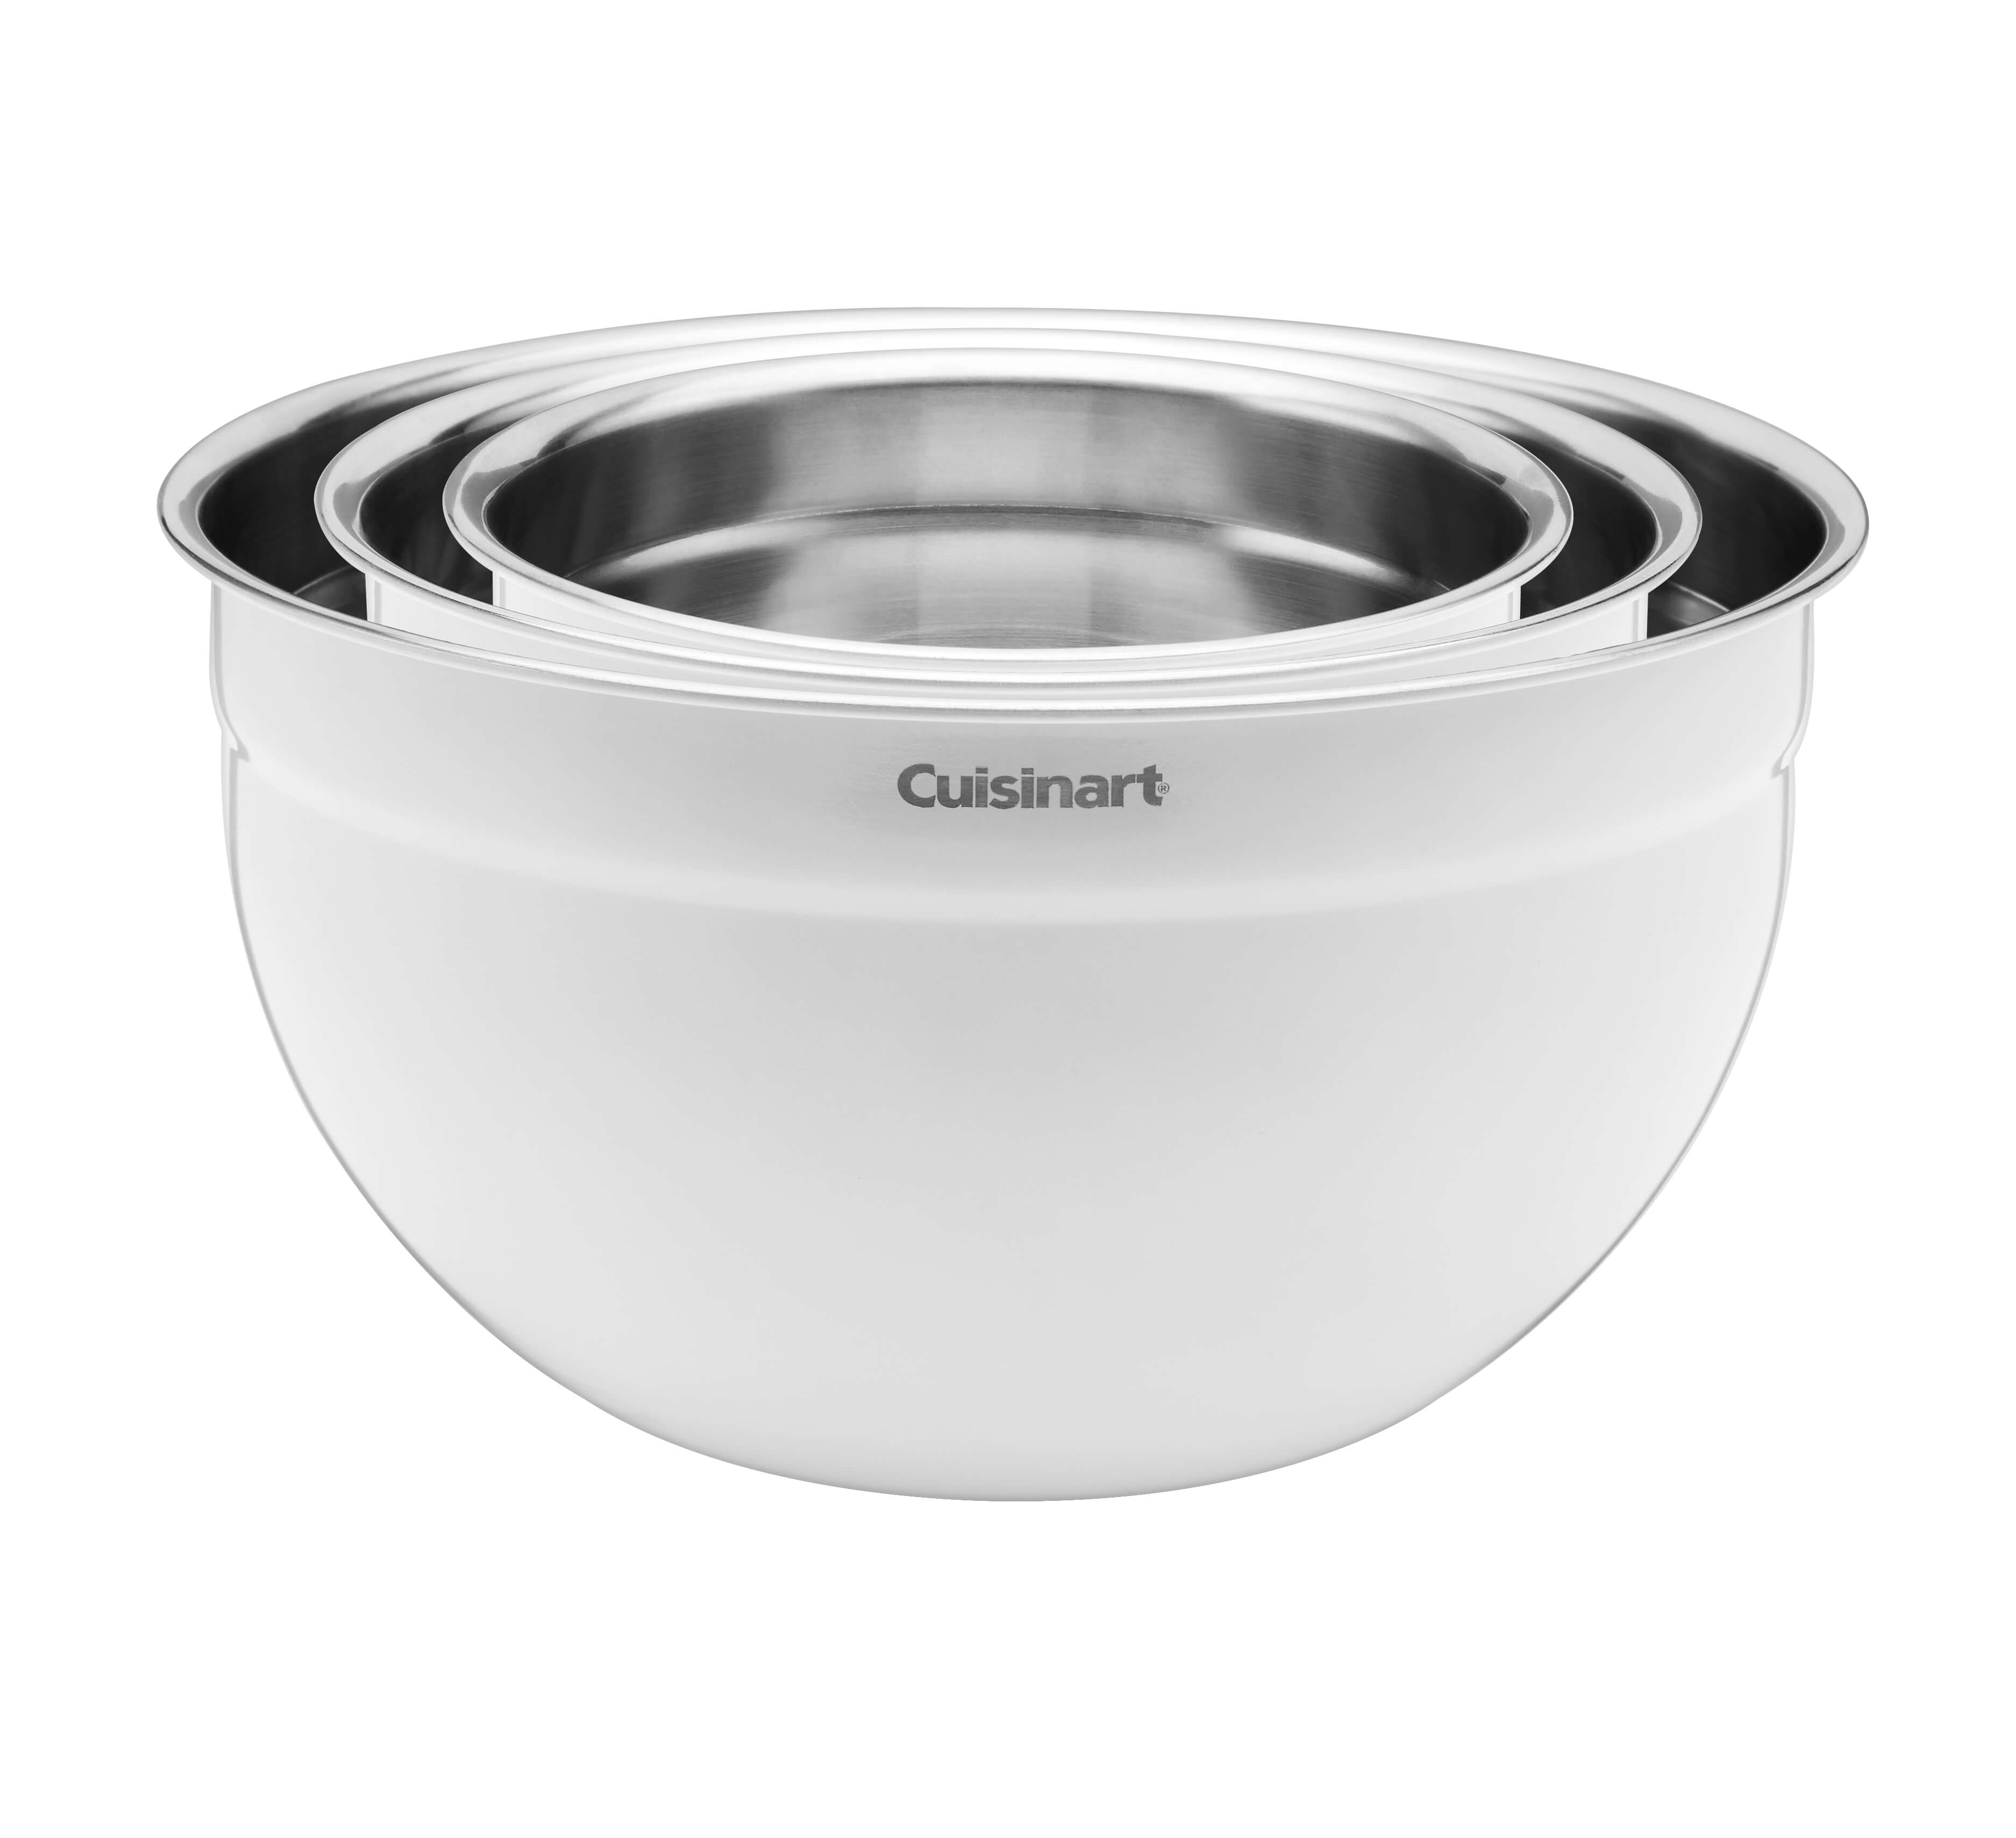 Cuisinart Mixing Bowl Set, Stainless Steel, 3-Piece, CTG-00-SMB